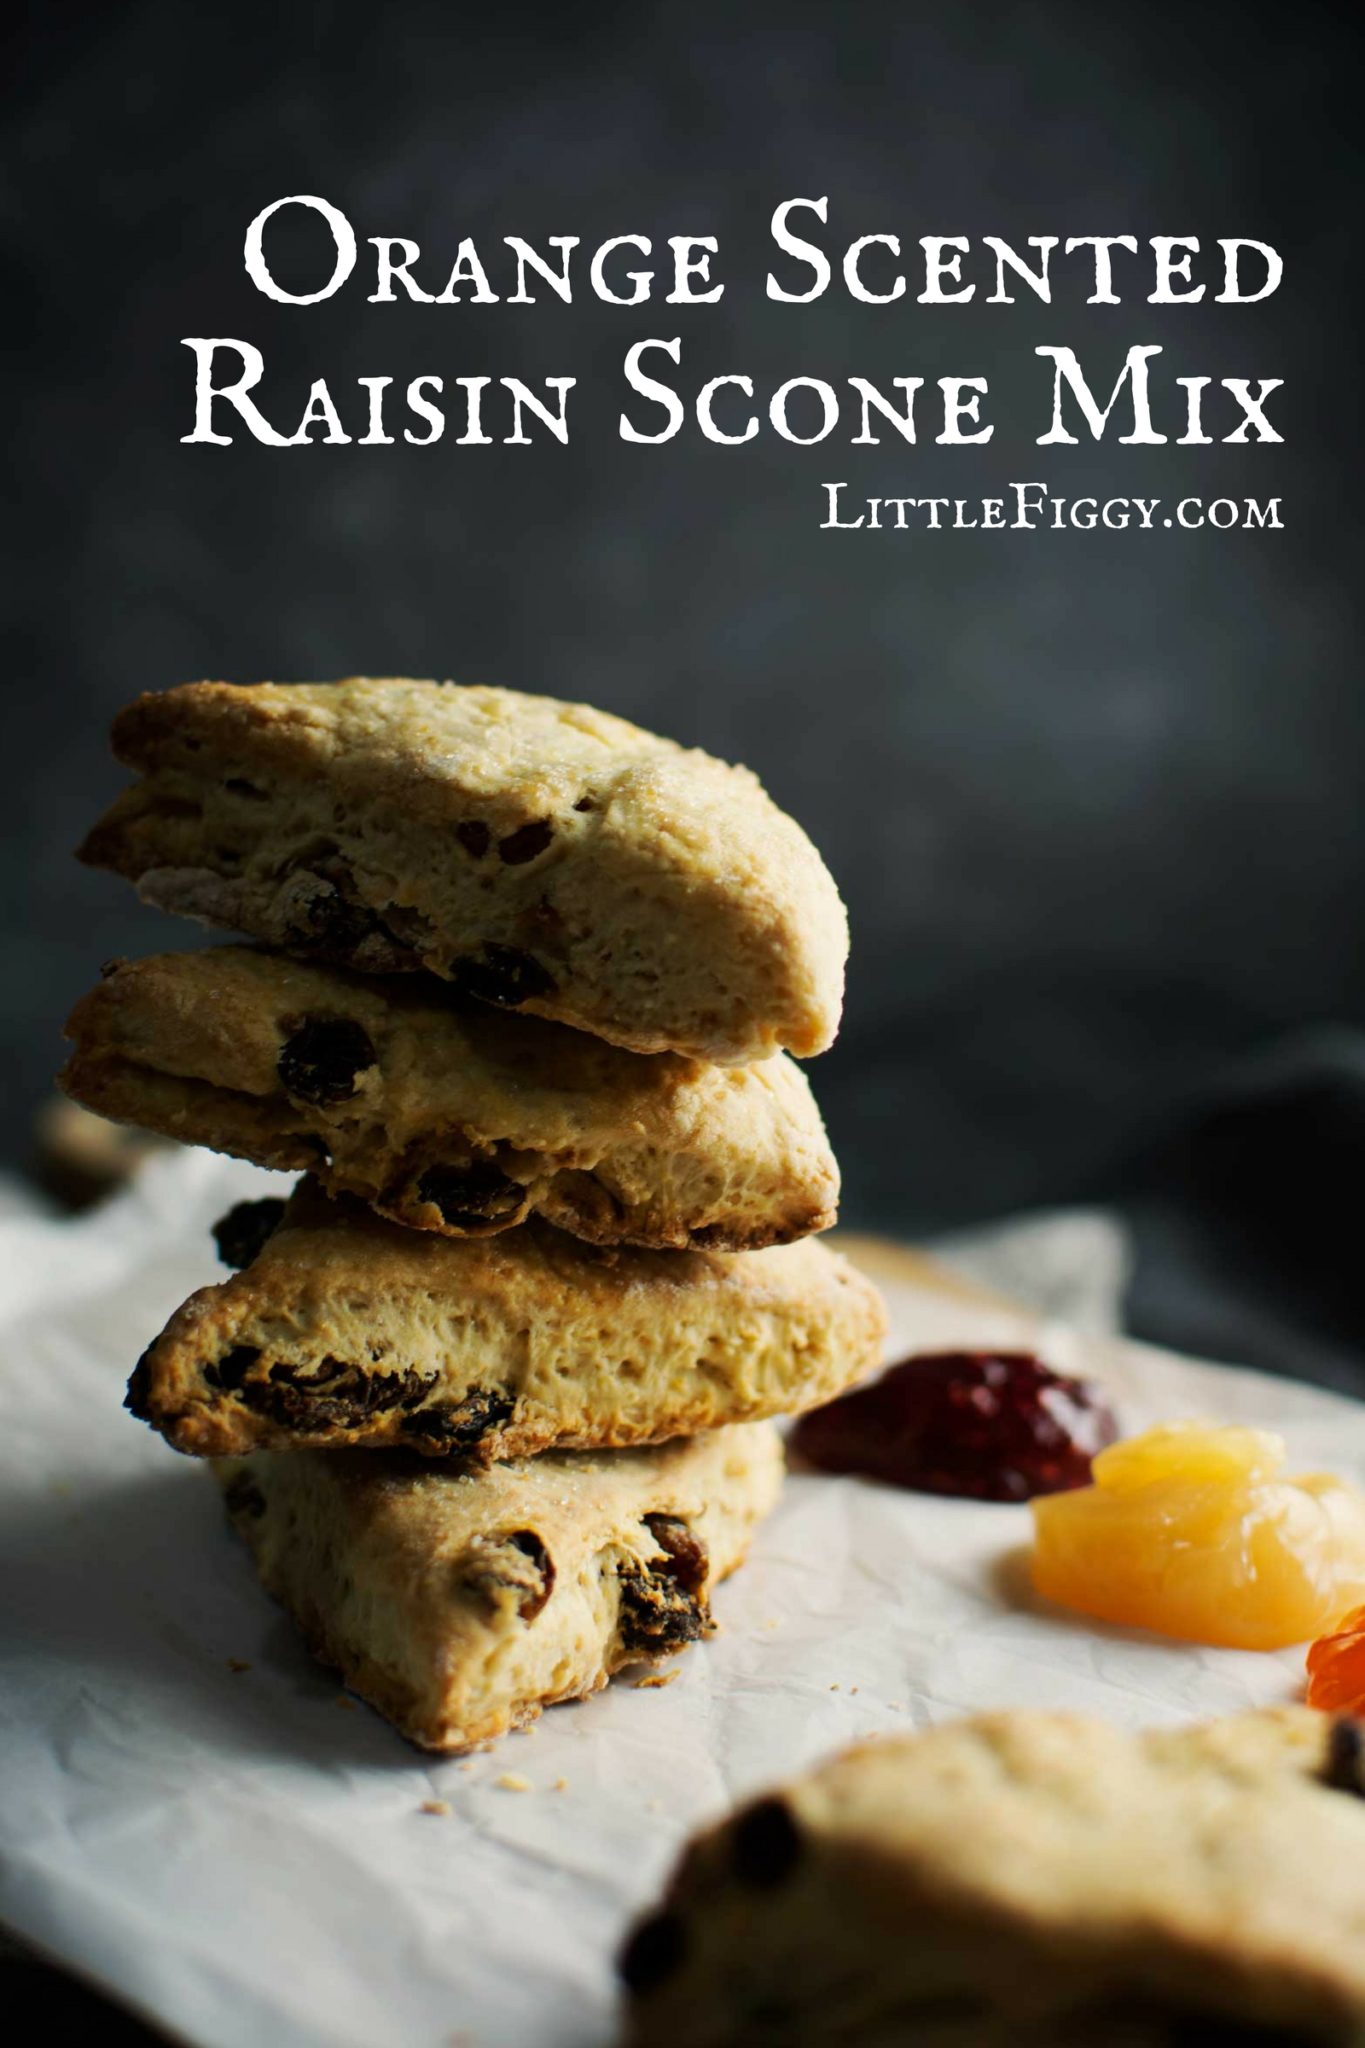 Easy to make & perfect for gifts from the kitchen, Orange Scented Raisin Scone Mix! Get the recipe from @LittleFiggyFood